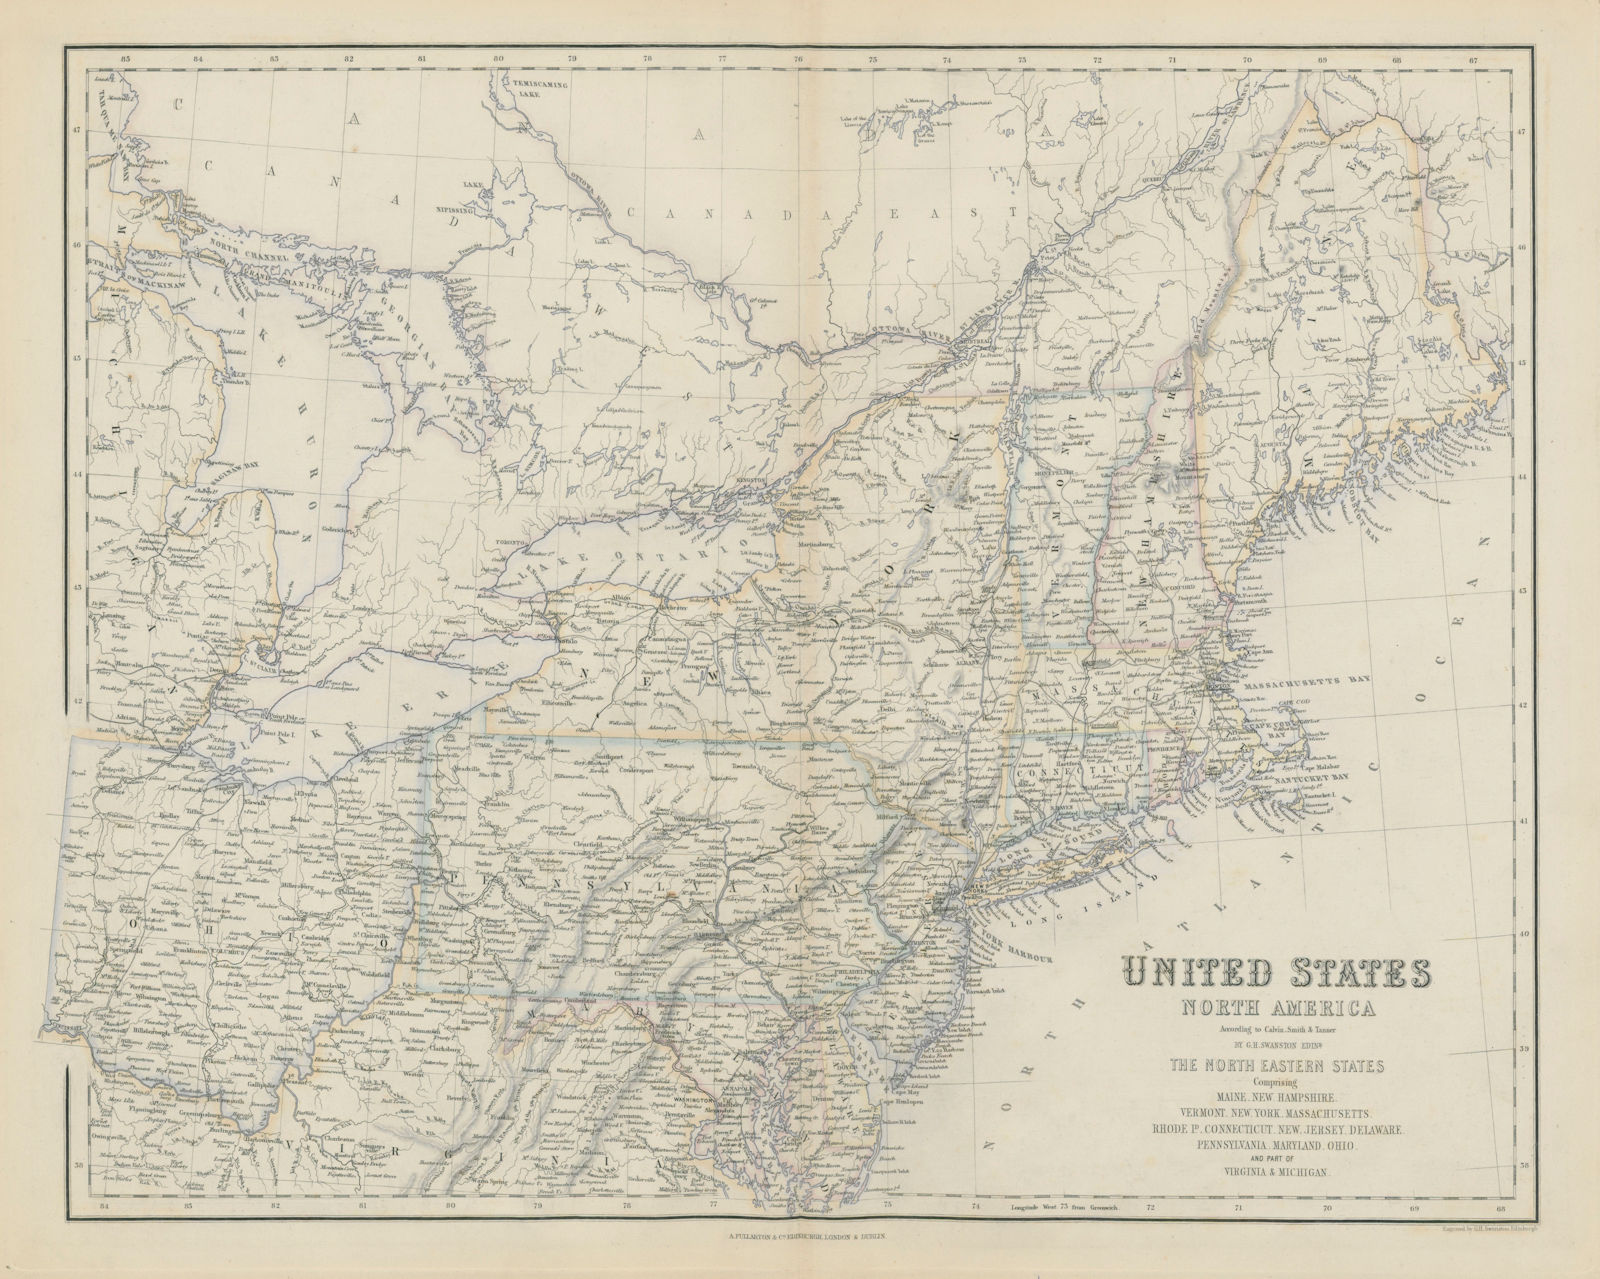 Associate Product United States North East. Mid-Atlantic & New England states. SWANSTON 1860 map